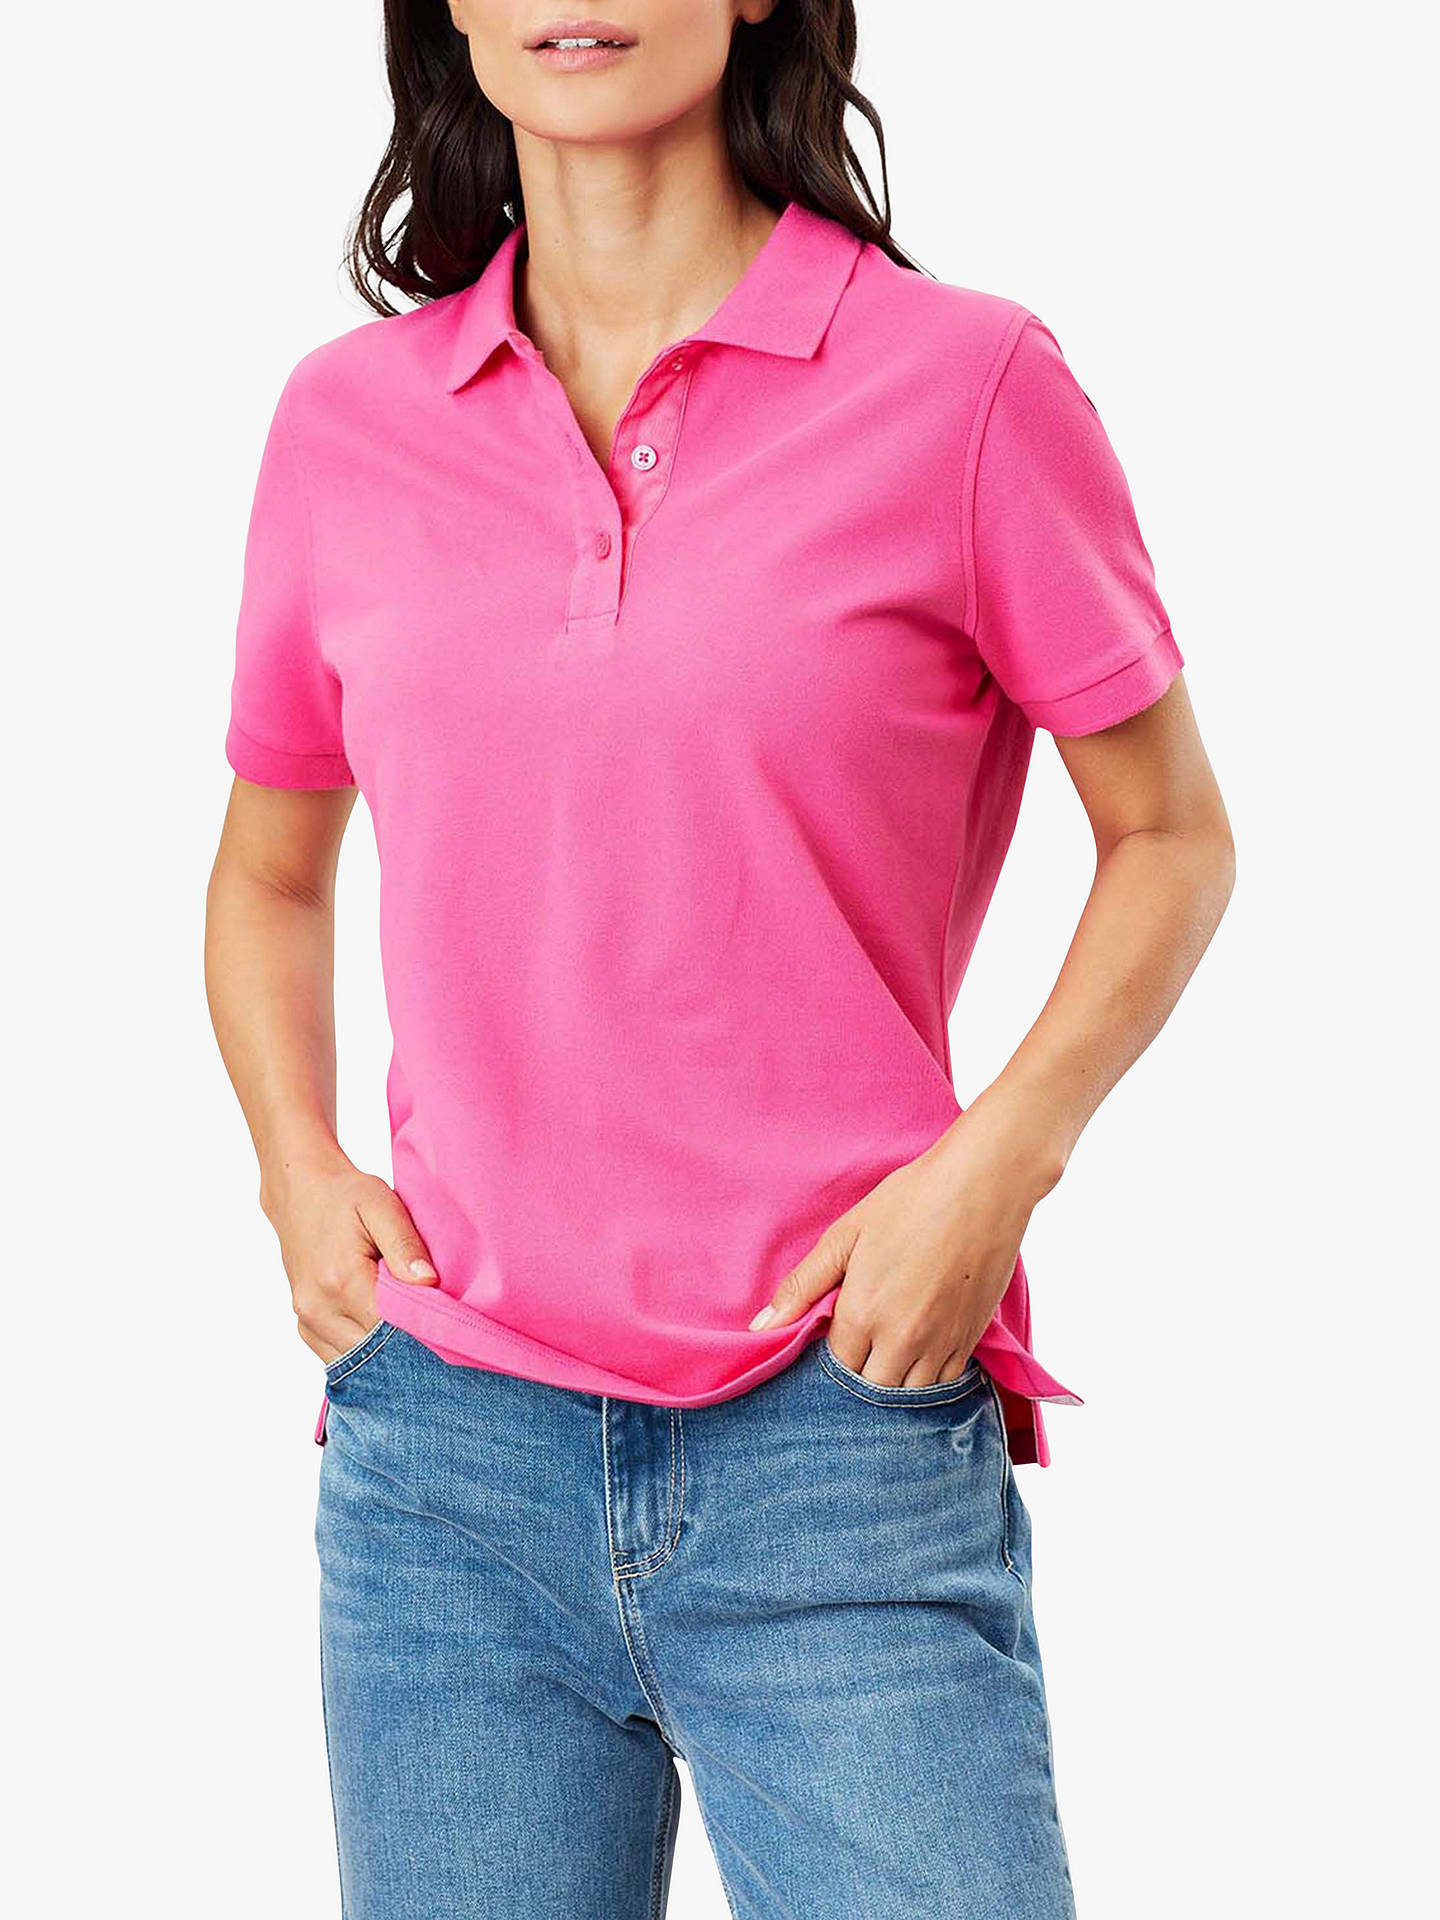 Joules Pippa Fitted Polo shirt at John Lewis & Partners